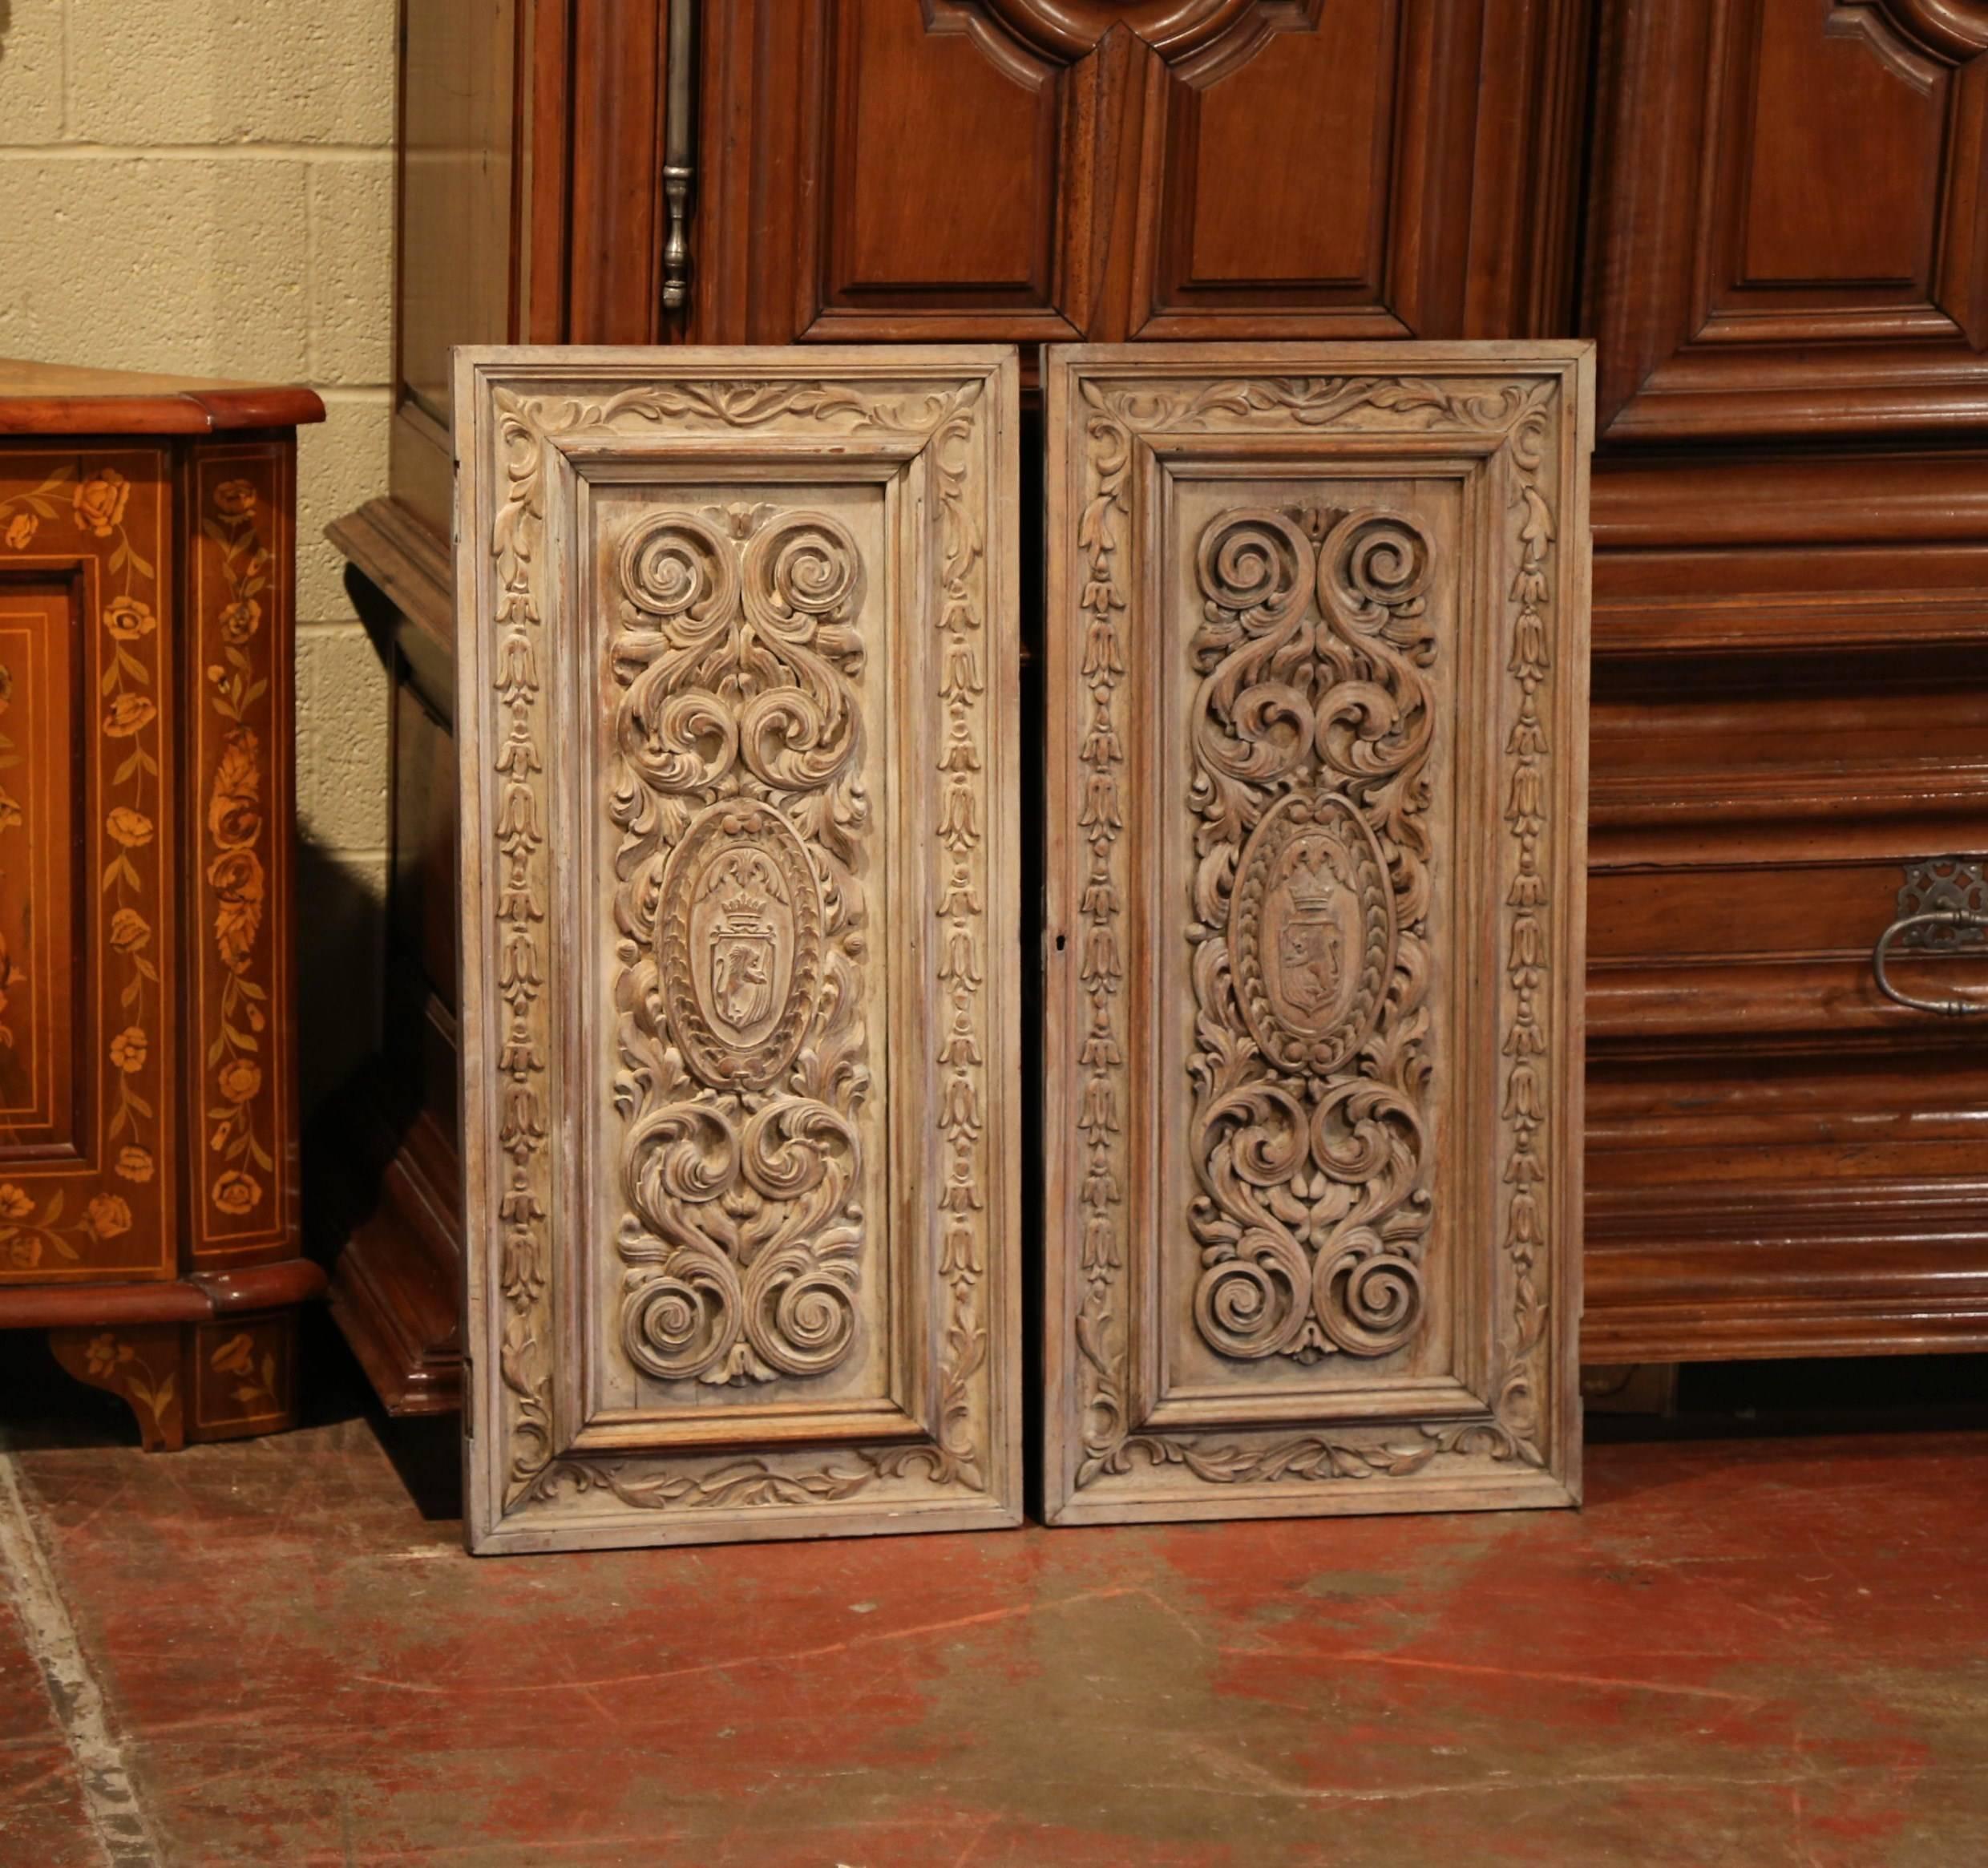 This exceptional pair of antique doors were crafted in France, circa 1880. The fruitwood wall panels feature delicate hand-carved motifs with scrolls and leaves. The central medallions show two different coat of arms. The wood panels are in